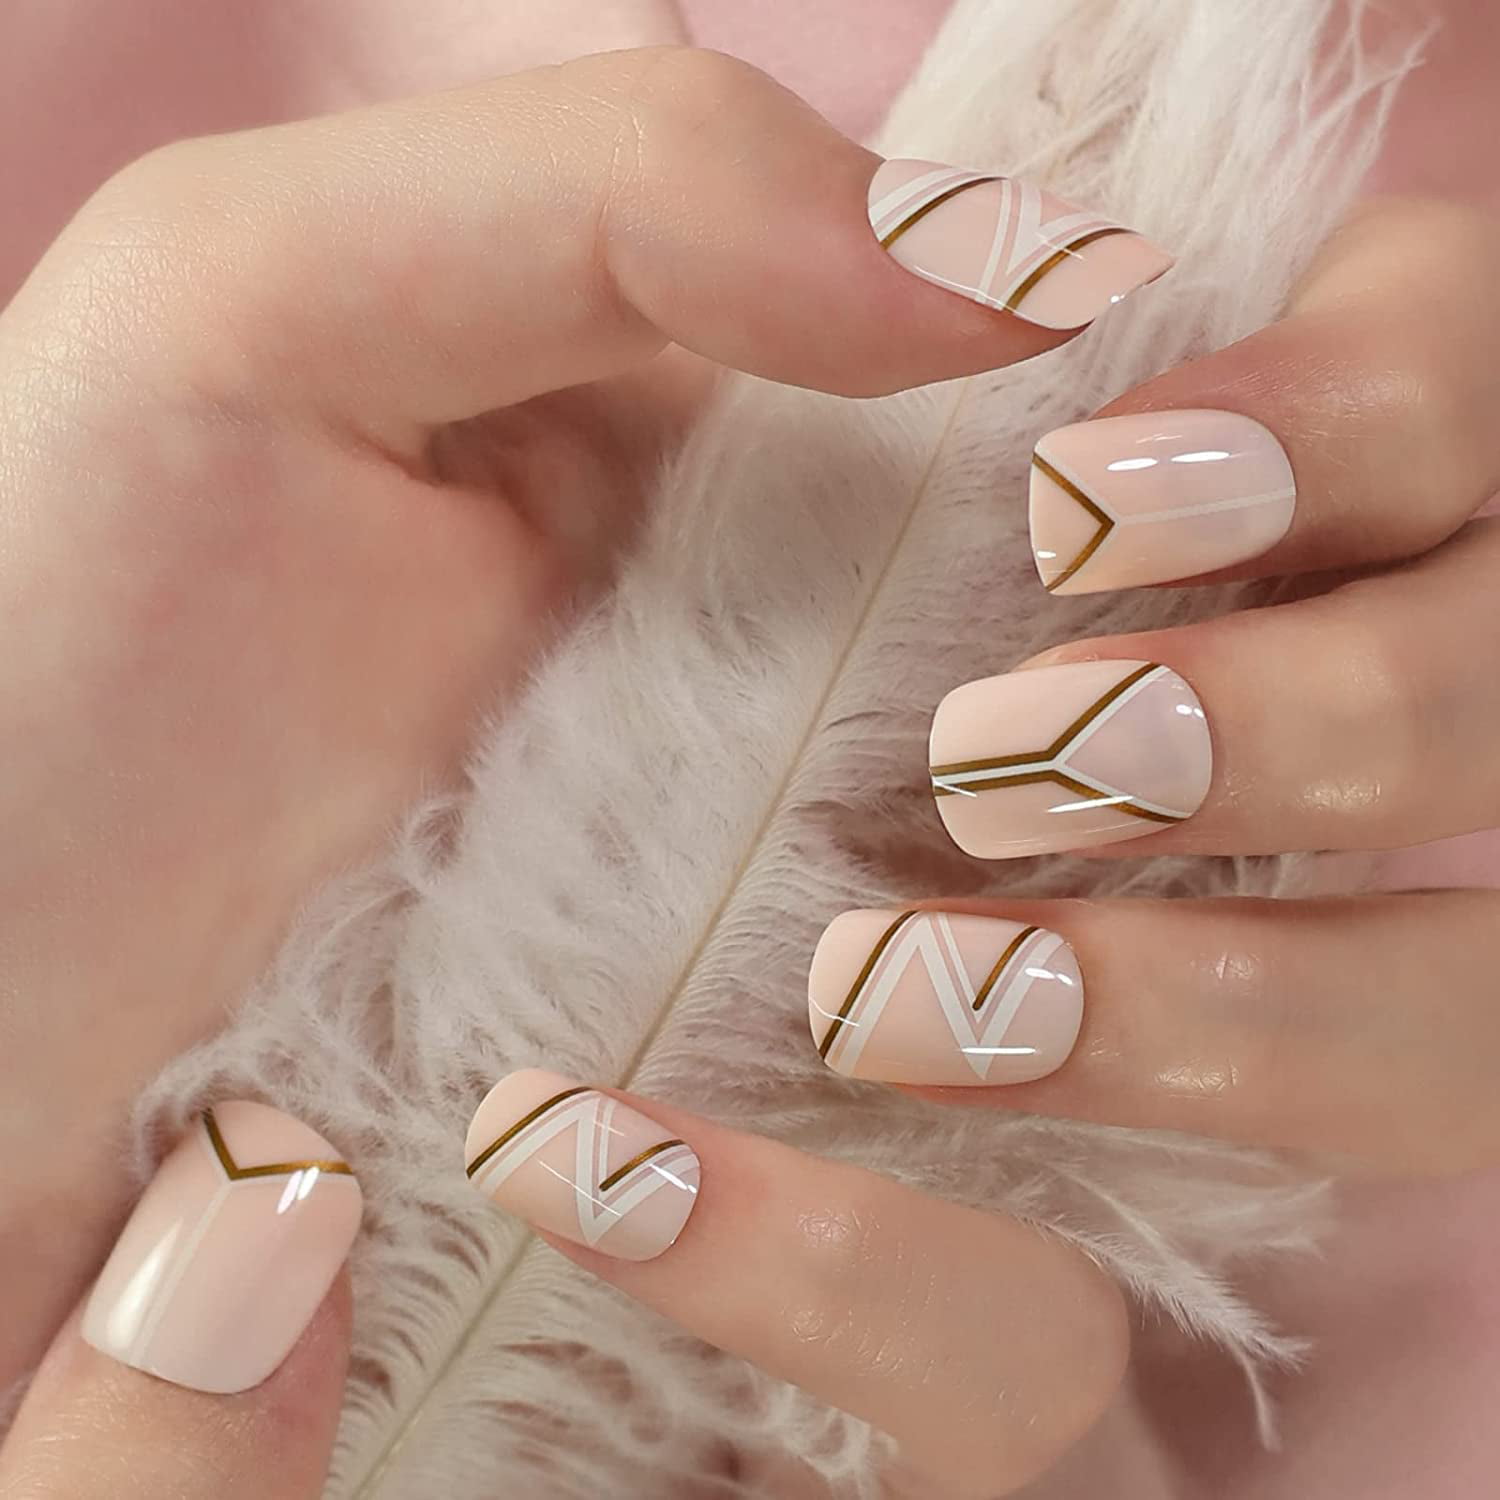 Round Short Daily Designed Fake Nails Nude Pink With Gold Line Press on  False Nails Glossy Fingernails Acrylic Professional Nail Art Tips -  